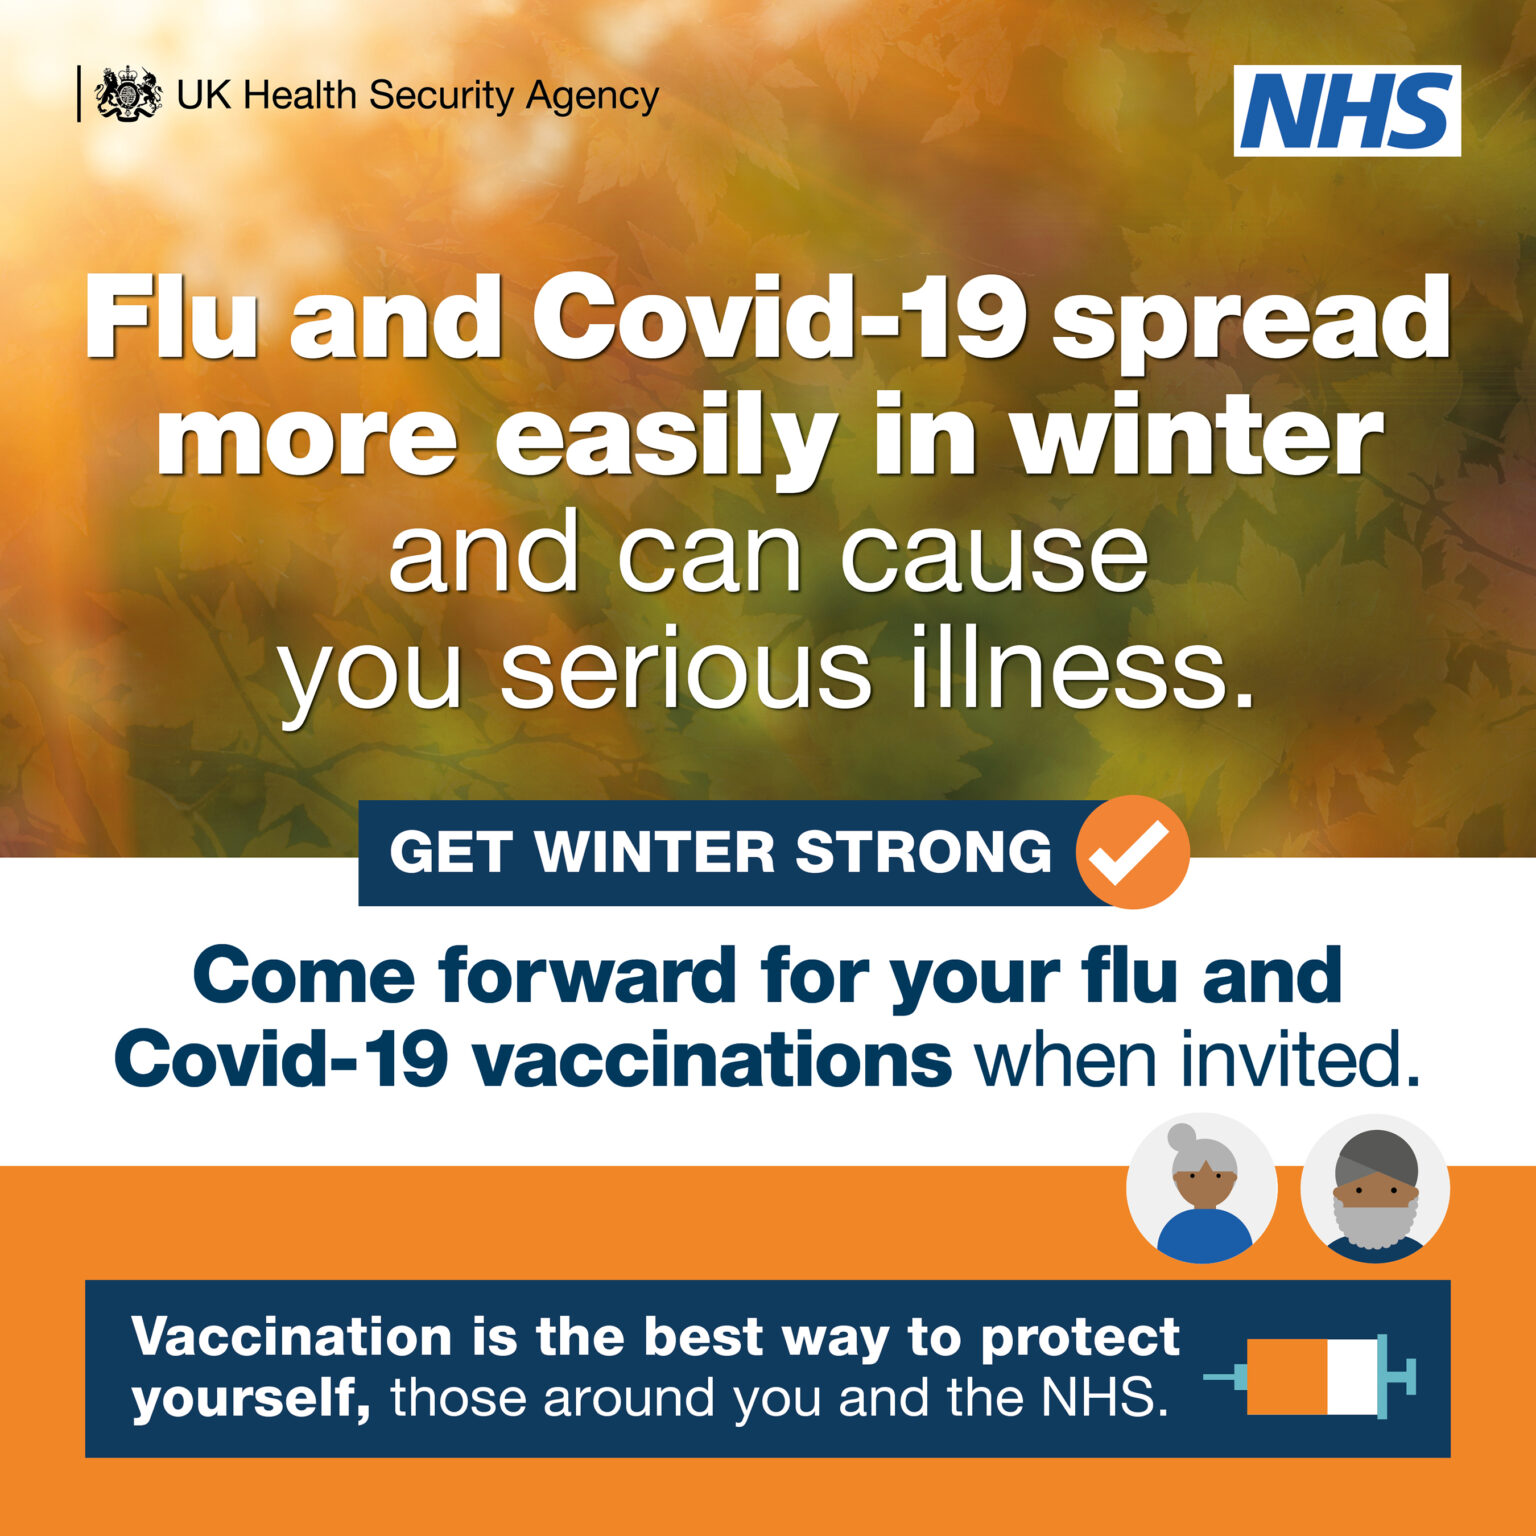 Flu and covid-19 spread more easily in winter and can cause you serious illness. come forward for your flue and covid-19 vaccinations when invited. Vaccination is the best way to protect yourself, those around you and the NHS